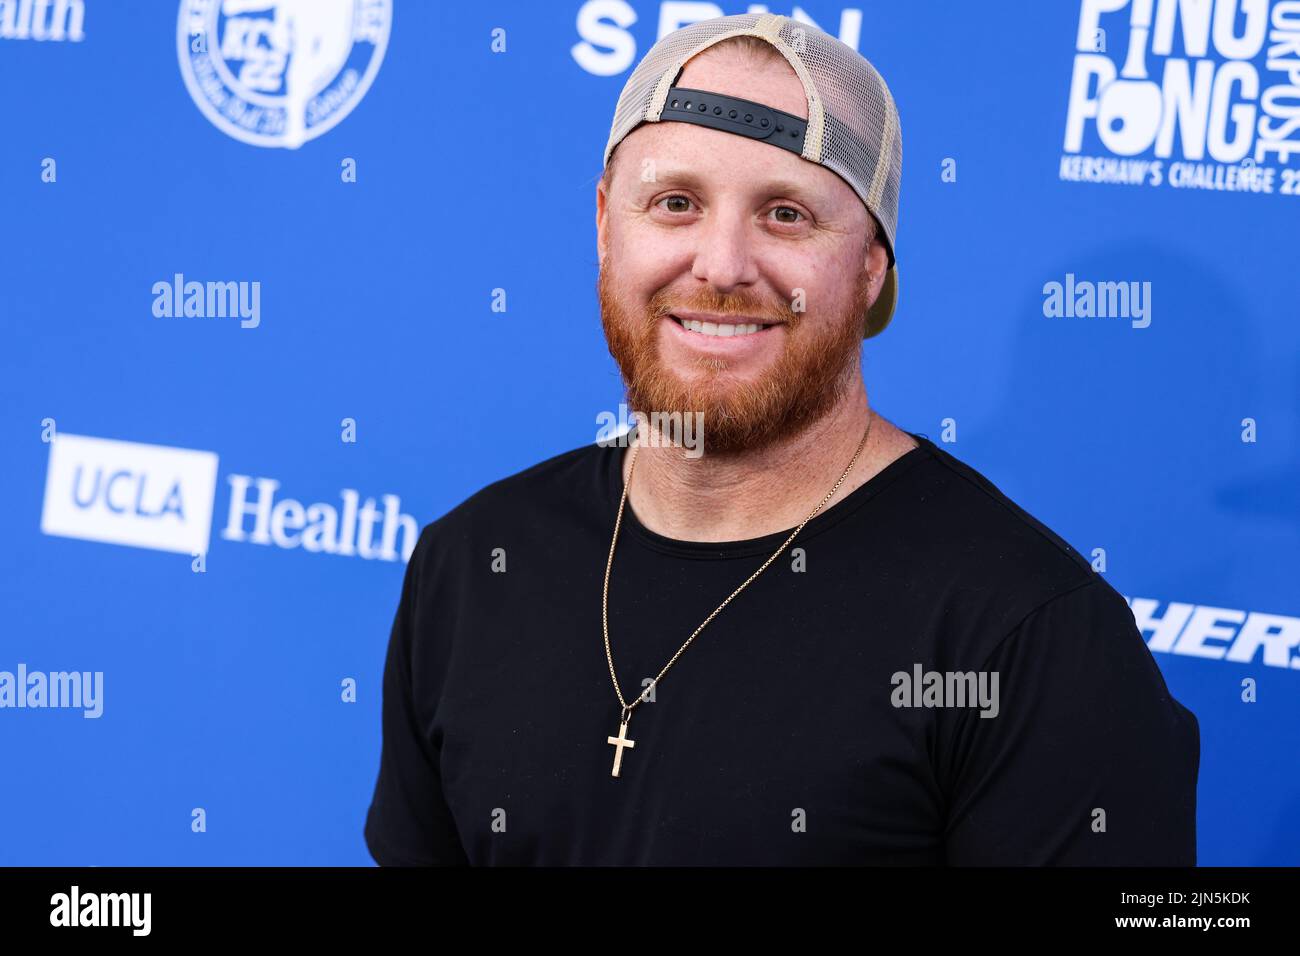 Los Angeles, United States. 08th Aug, 2022. ELYSIAN PARK, LOS ANGELES, CALIFORNIA, USA - AUGUST 08: American professional baseball third baseman for the Los Angeles Dodgers of Major League Baseball Justin Turner arrives at Kershaw's Challenge Ping Pong 4 Purpose 2022 held at Dodger Stadium on August 8, 2022 in Elysian Park, Los Angeles, California, United States. (Photo by Xavier Collin/Image Press Agency) Credit: Image Press Agency/Alamy Live News Stock Photo